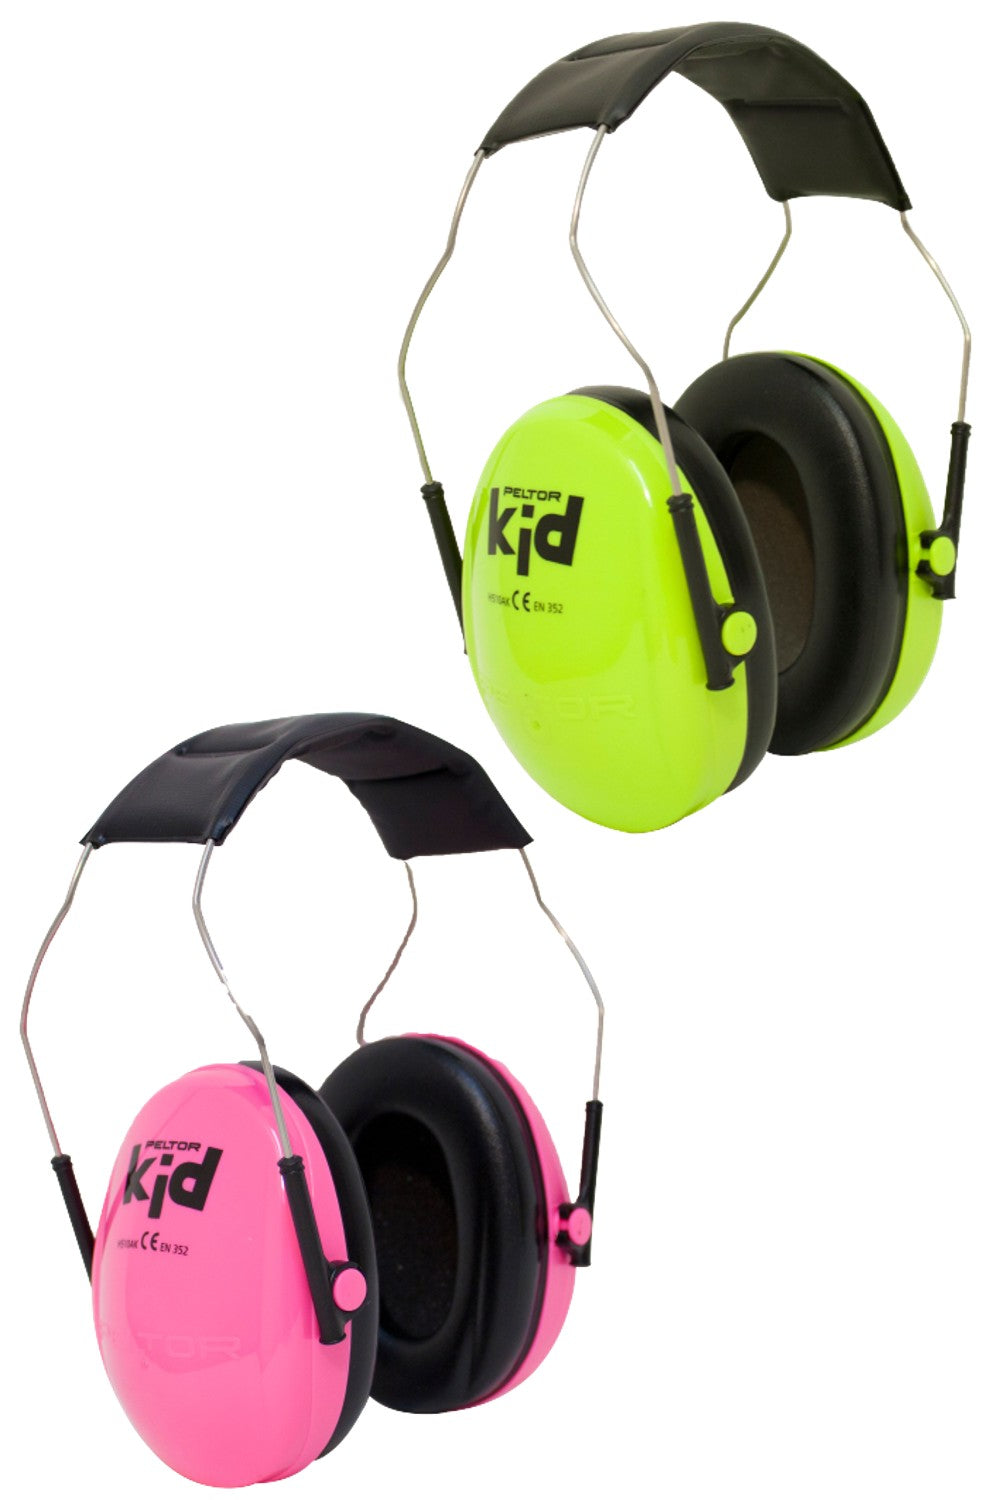 Peltor Kids Junior Hearing Protection In Yellow/Neon Green and Pink